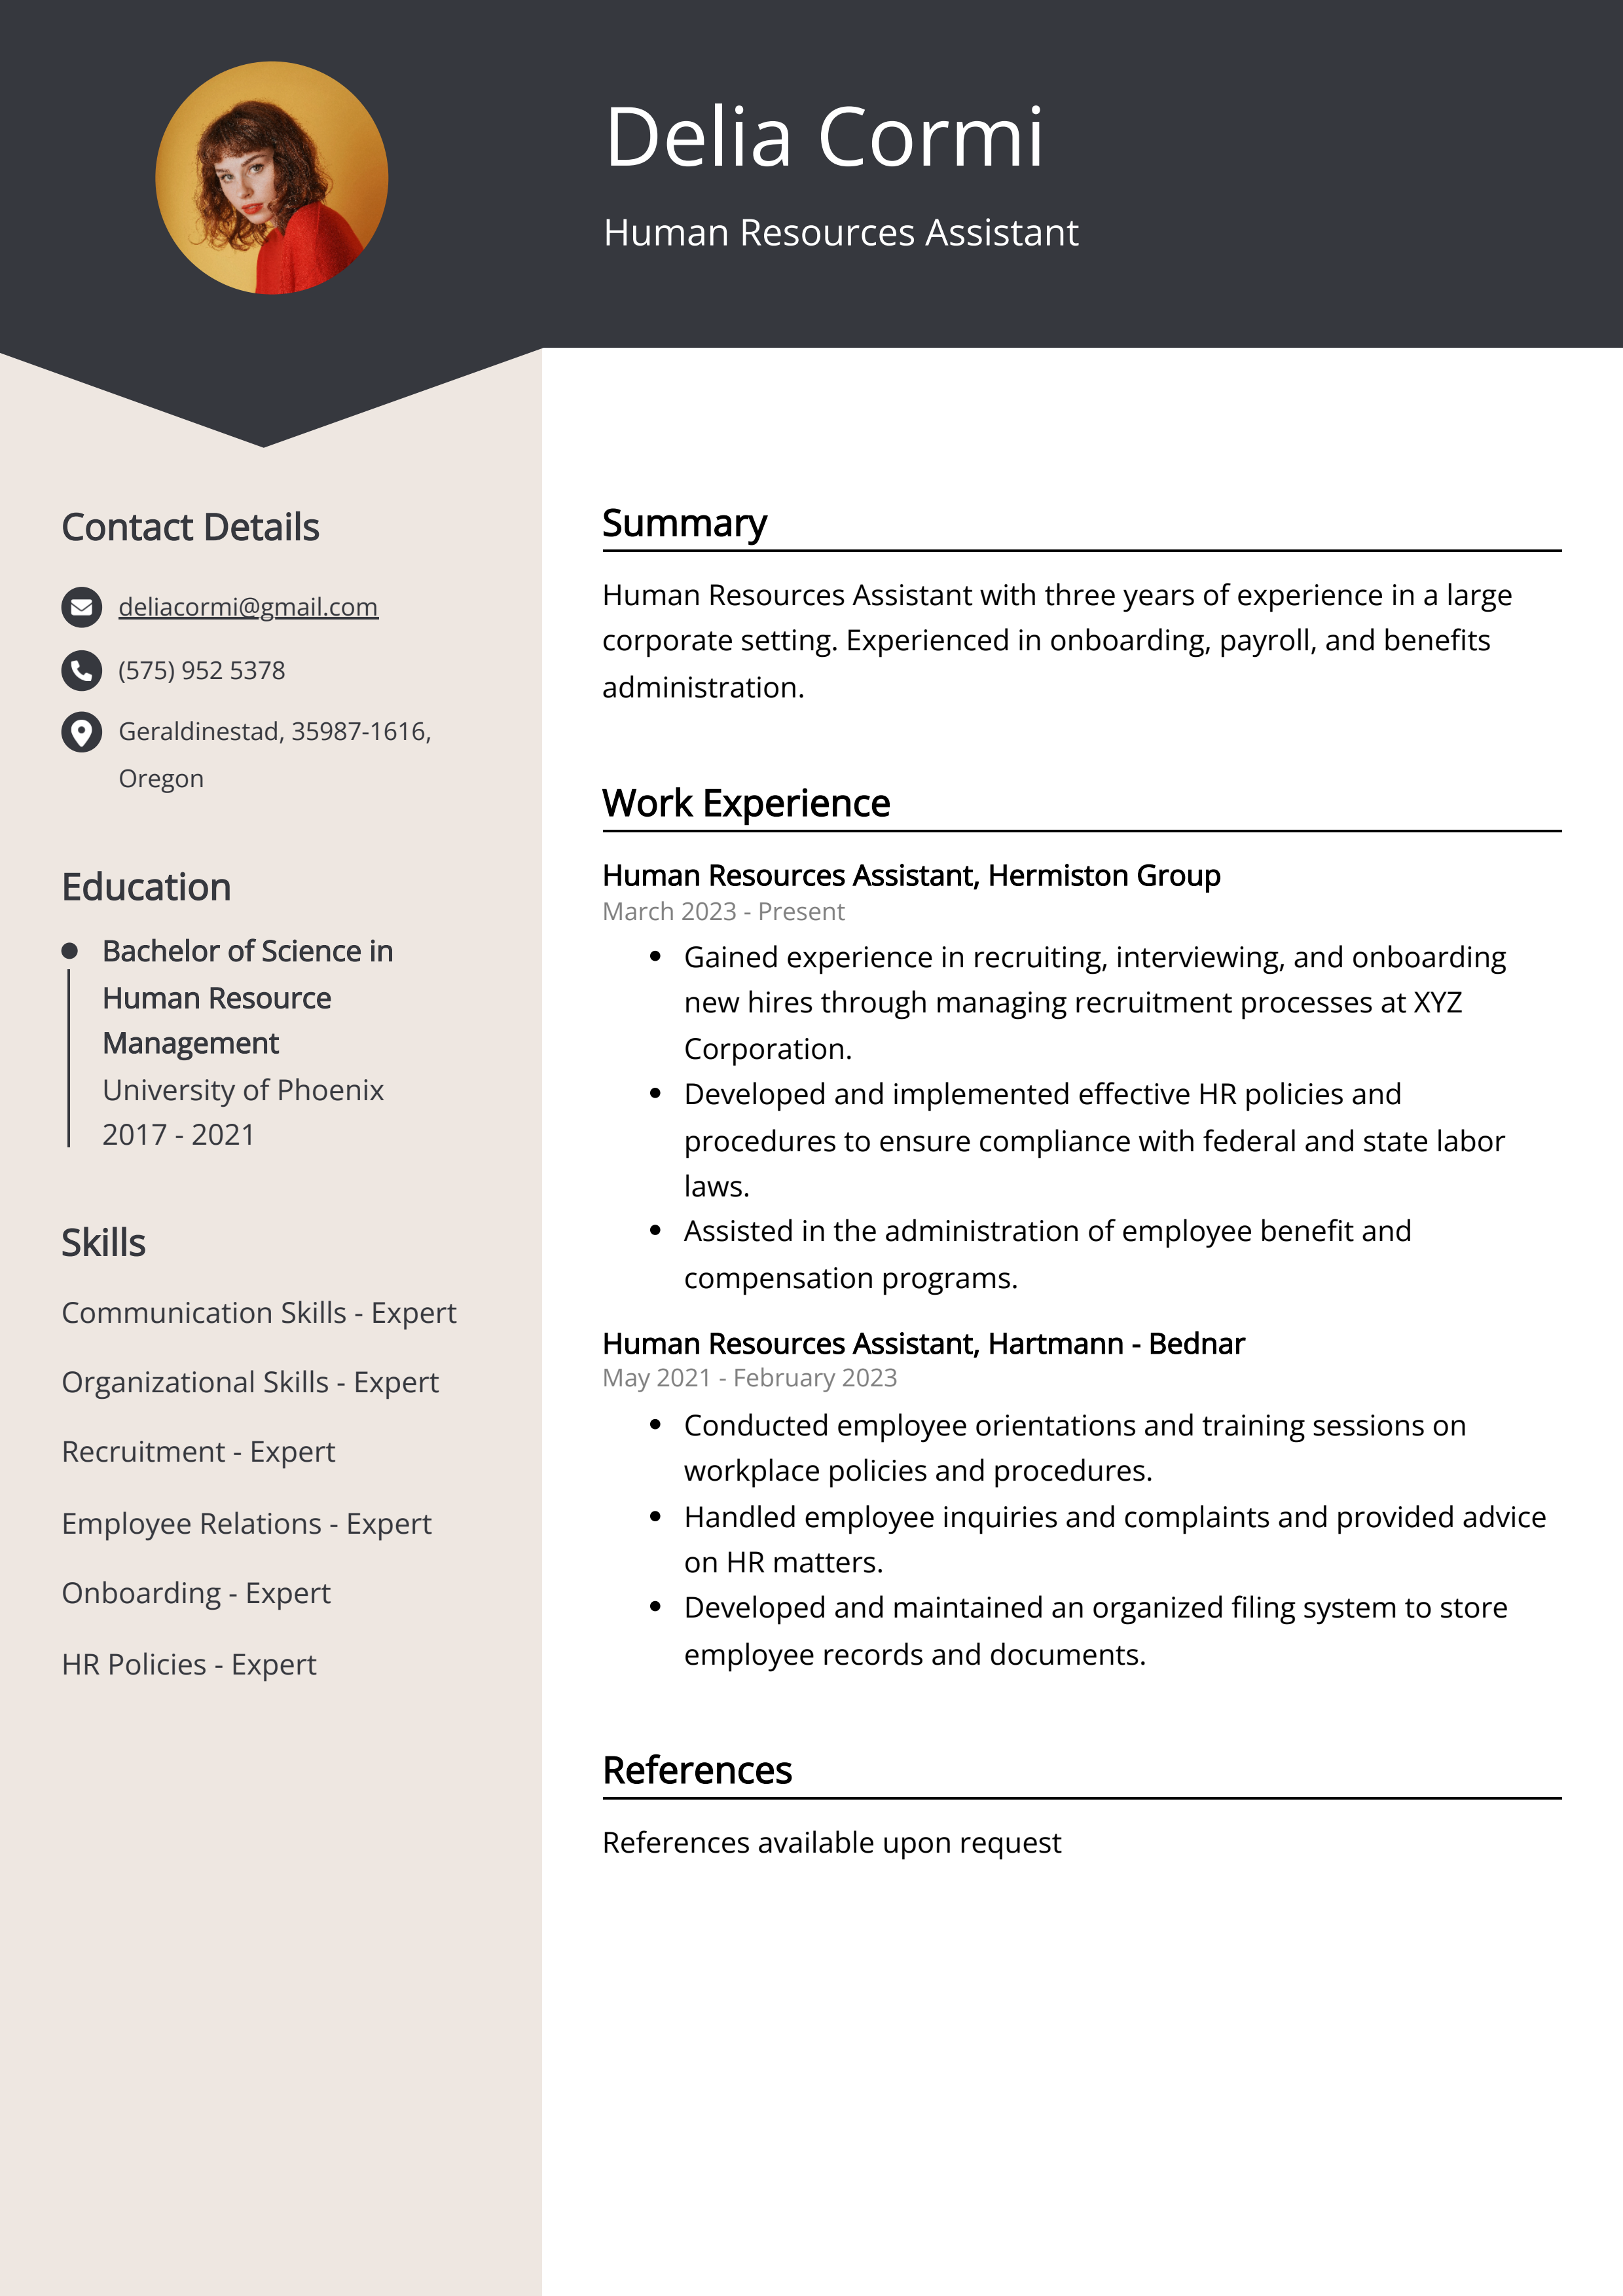 Human Resources Assistant CV Example